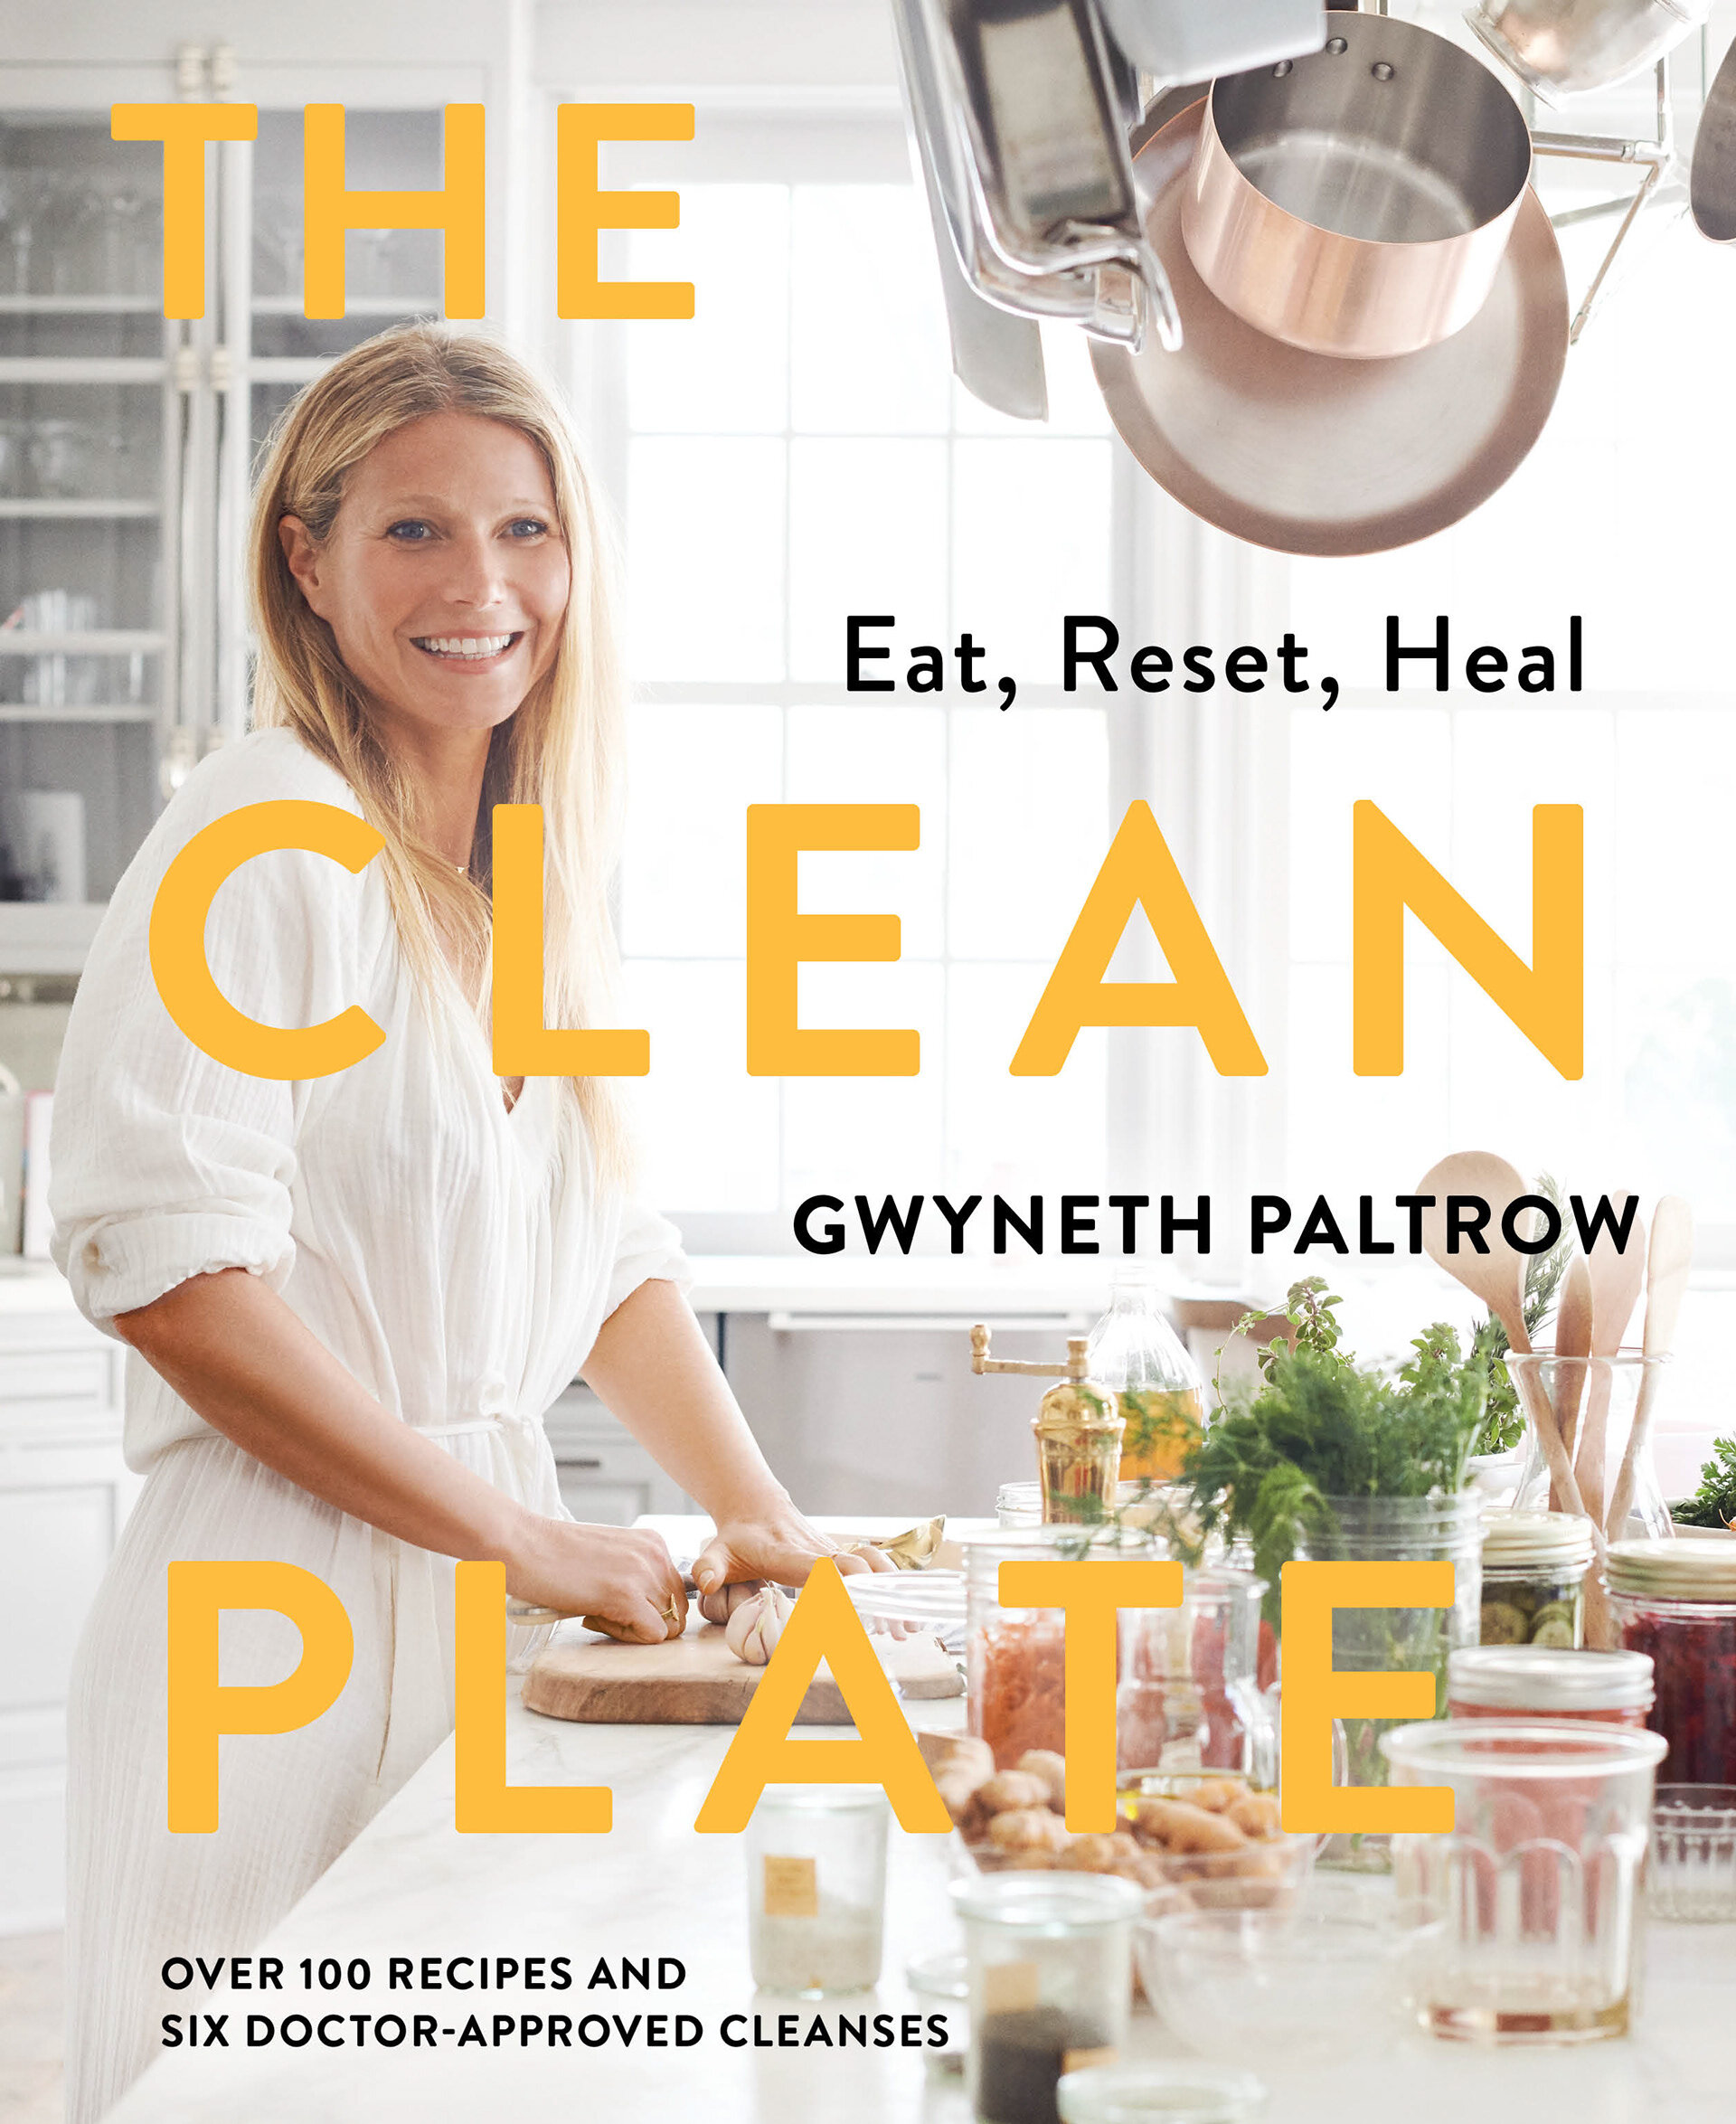  The Clean Plate   Photographer - Ditte Isager   Food Stylist - Susie Theodorou   on behalf of goop, inc  